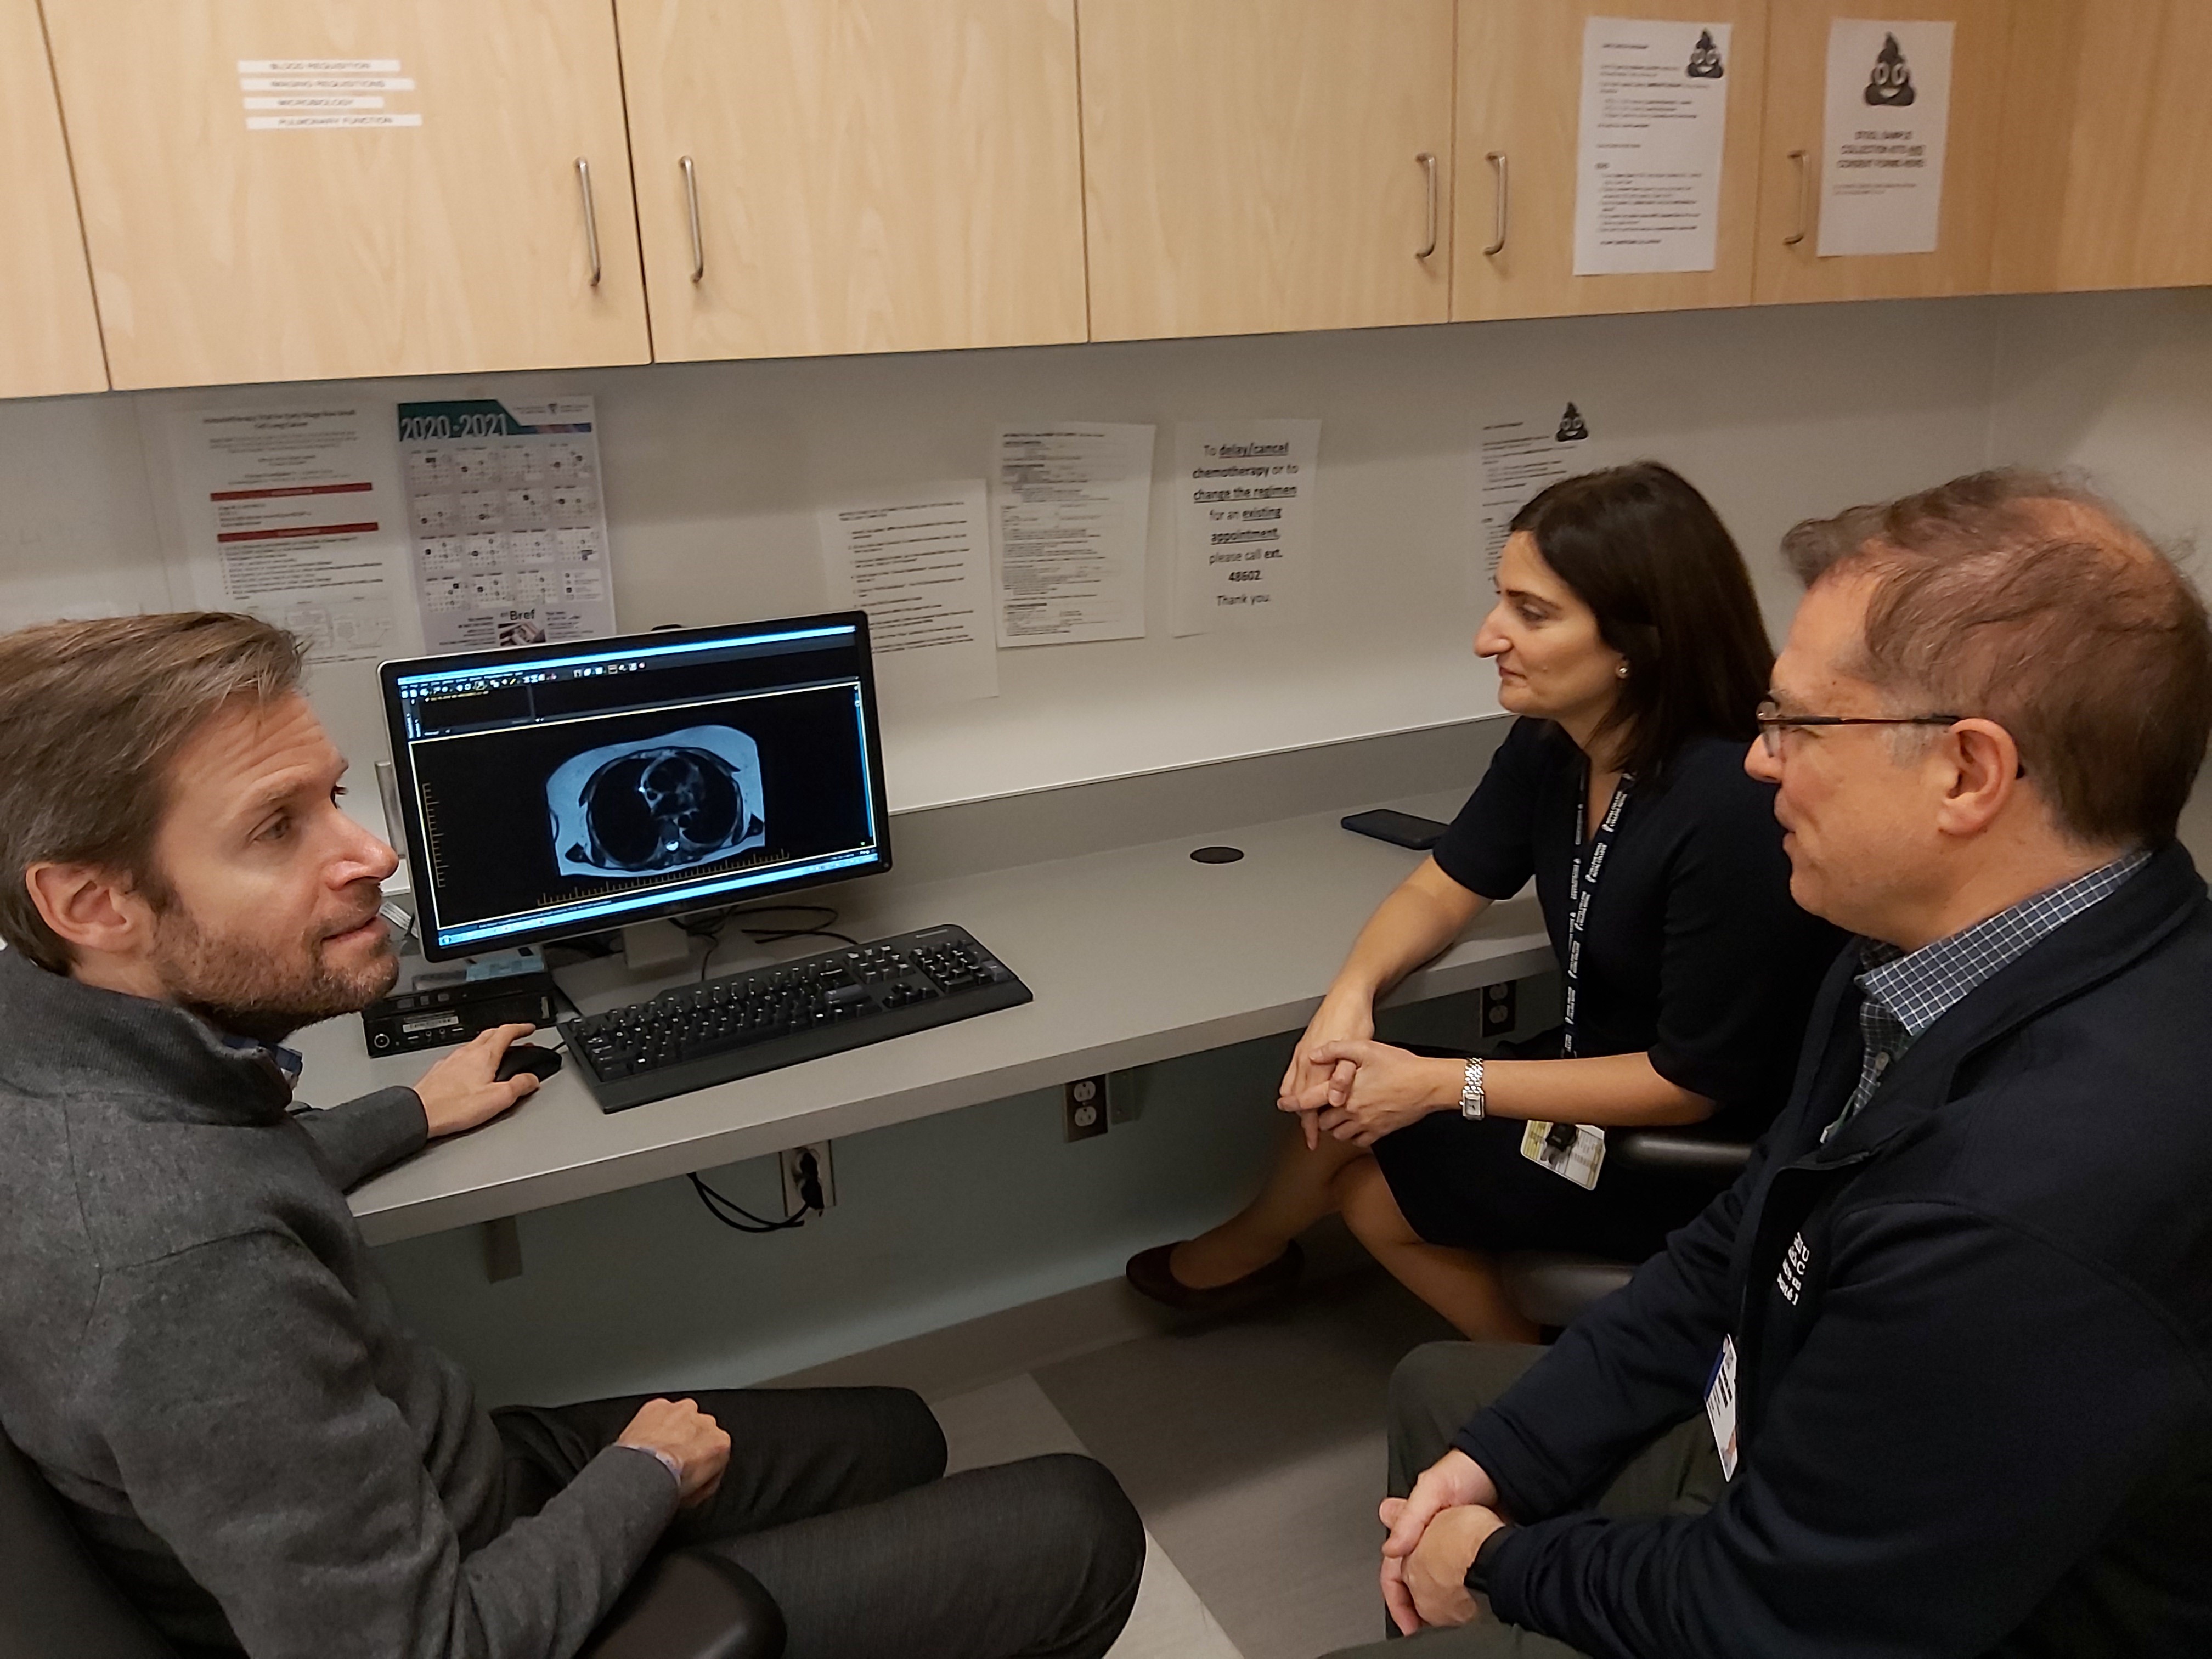 Radiation oncologists and medical physicist looking at image on screen